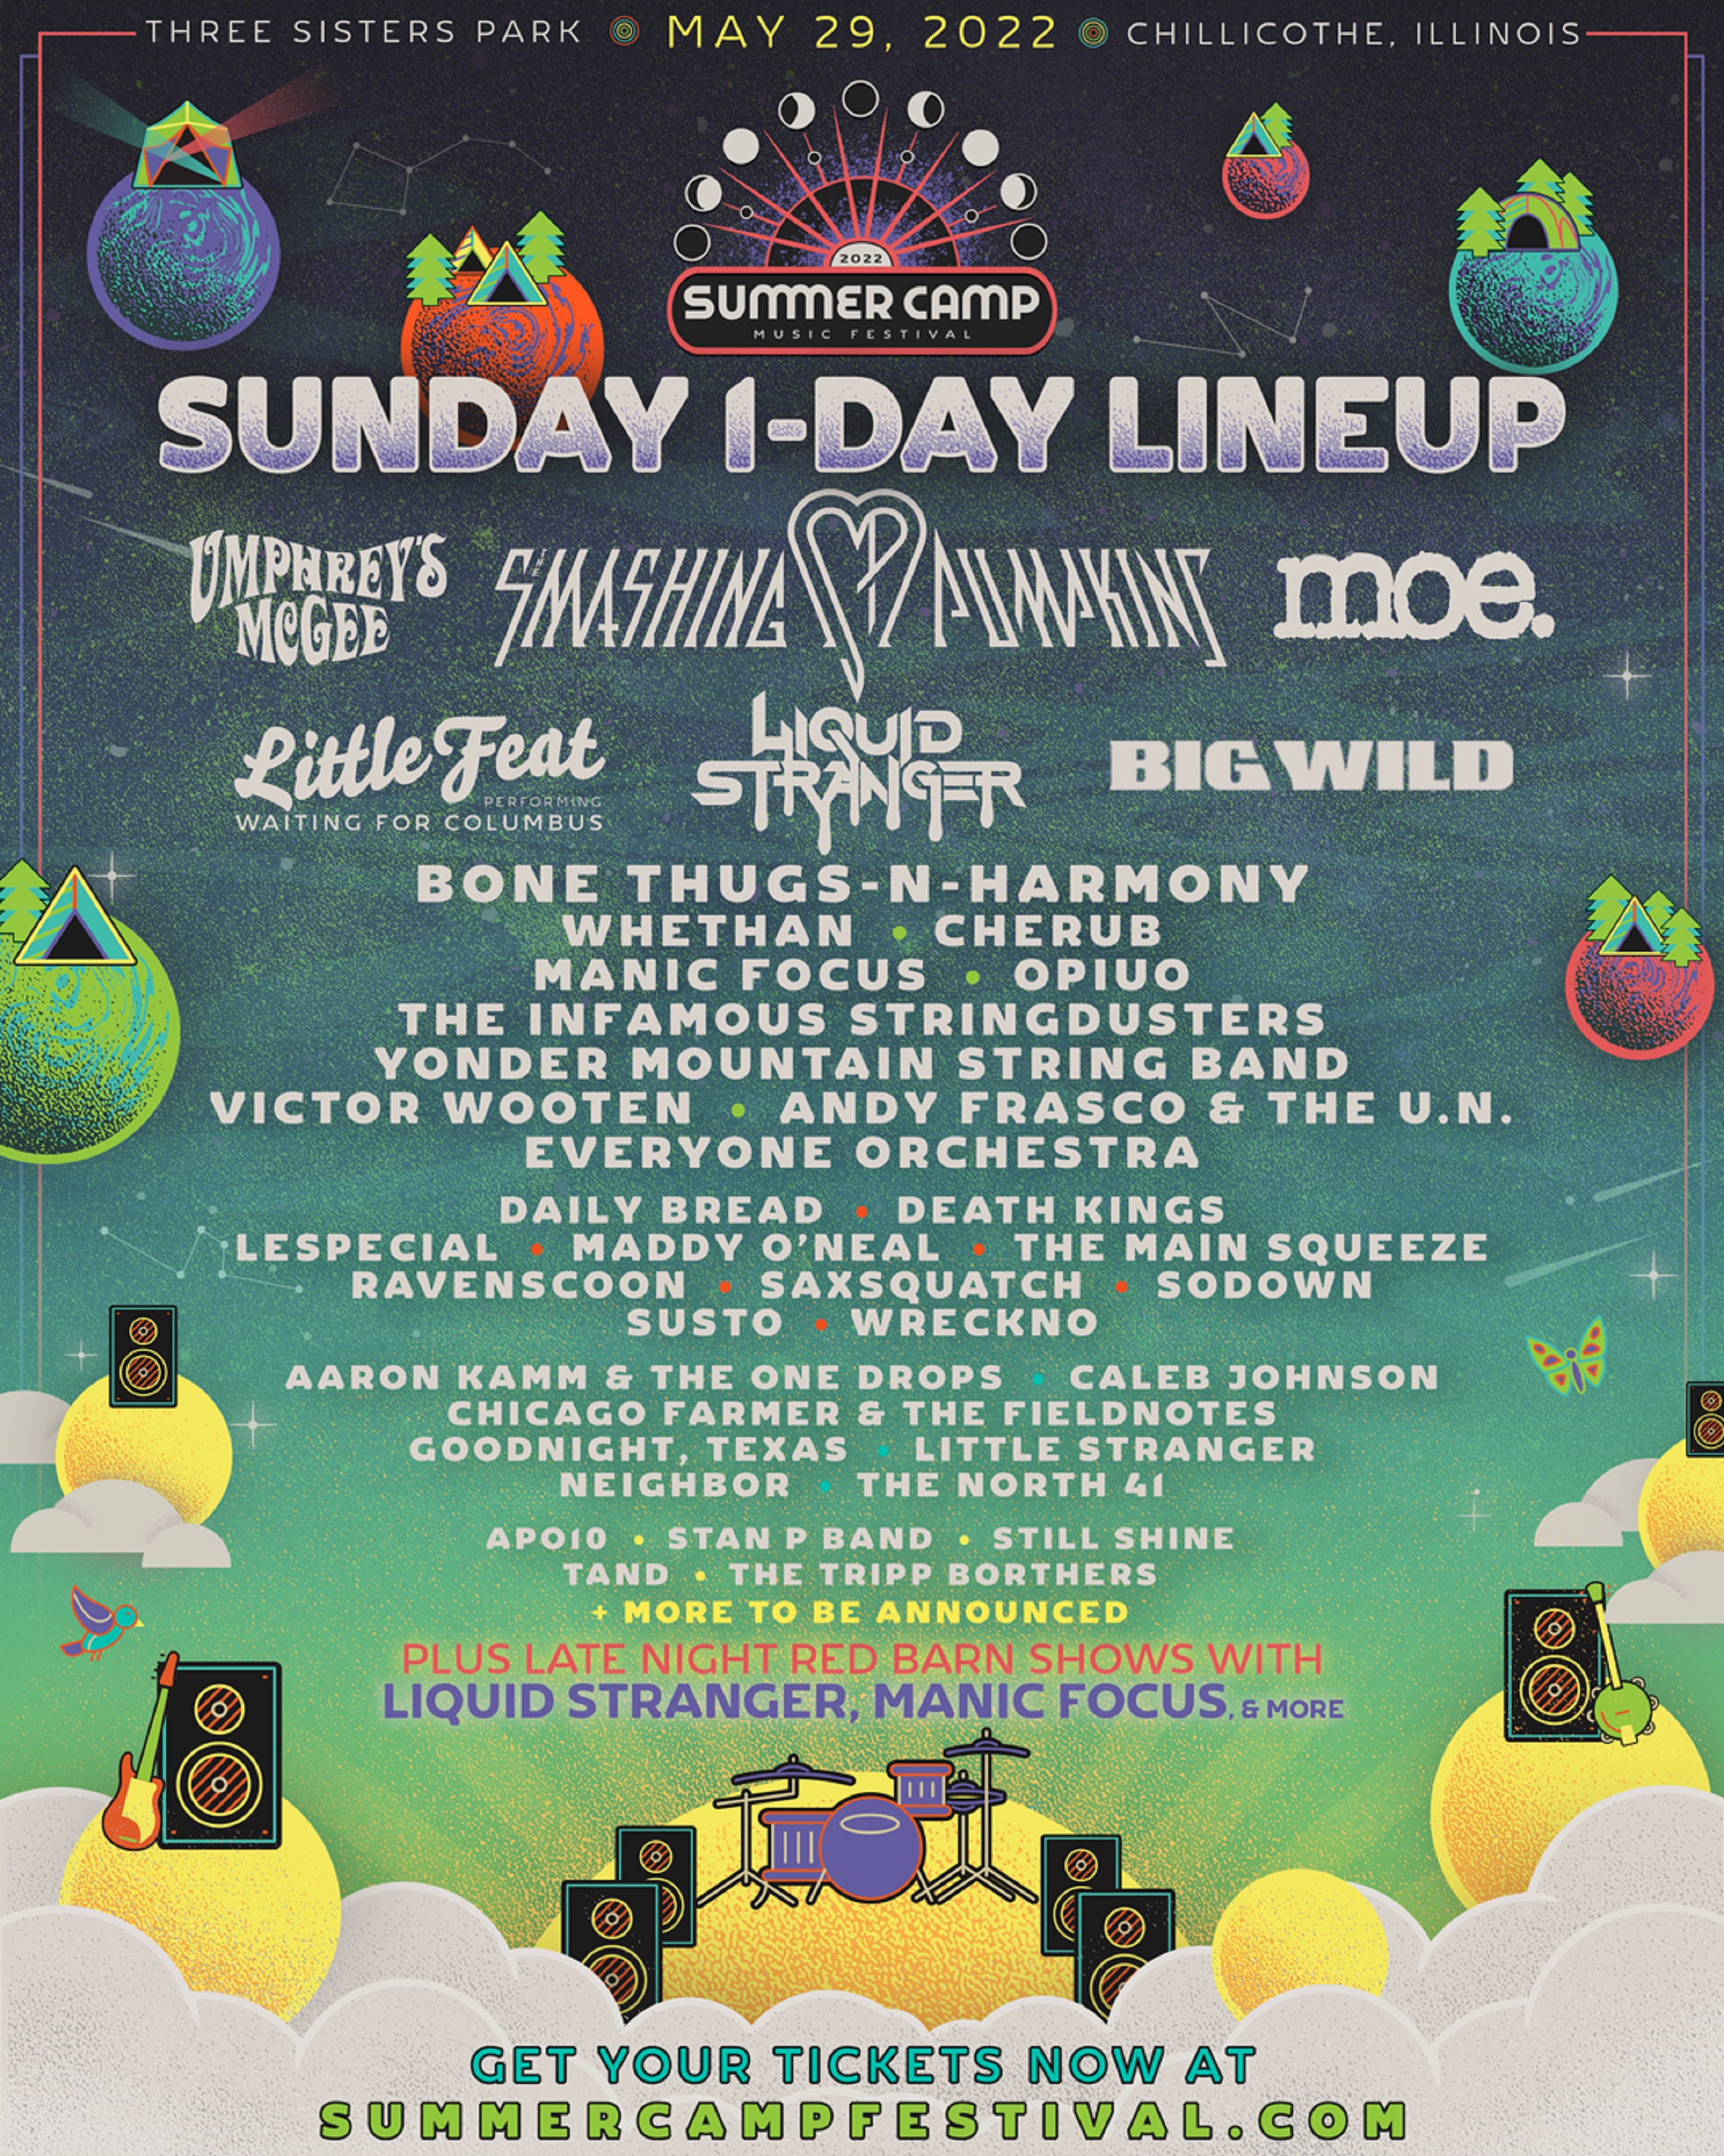 Summer Camp Music Festival Sunday 1-Day Lineup Announced